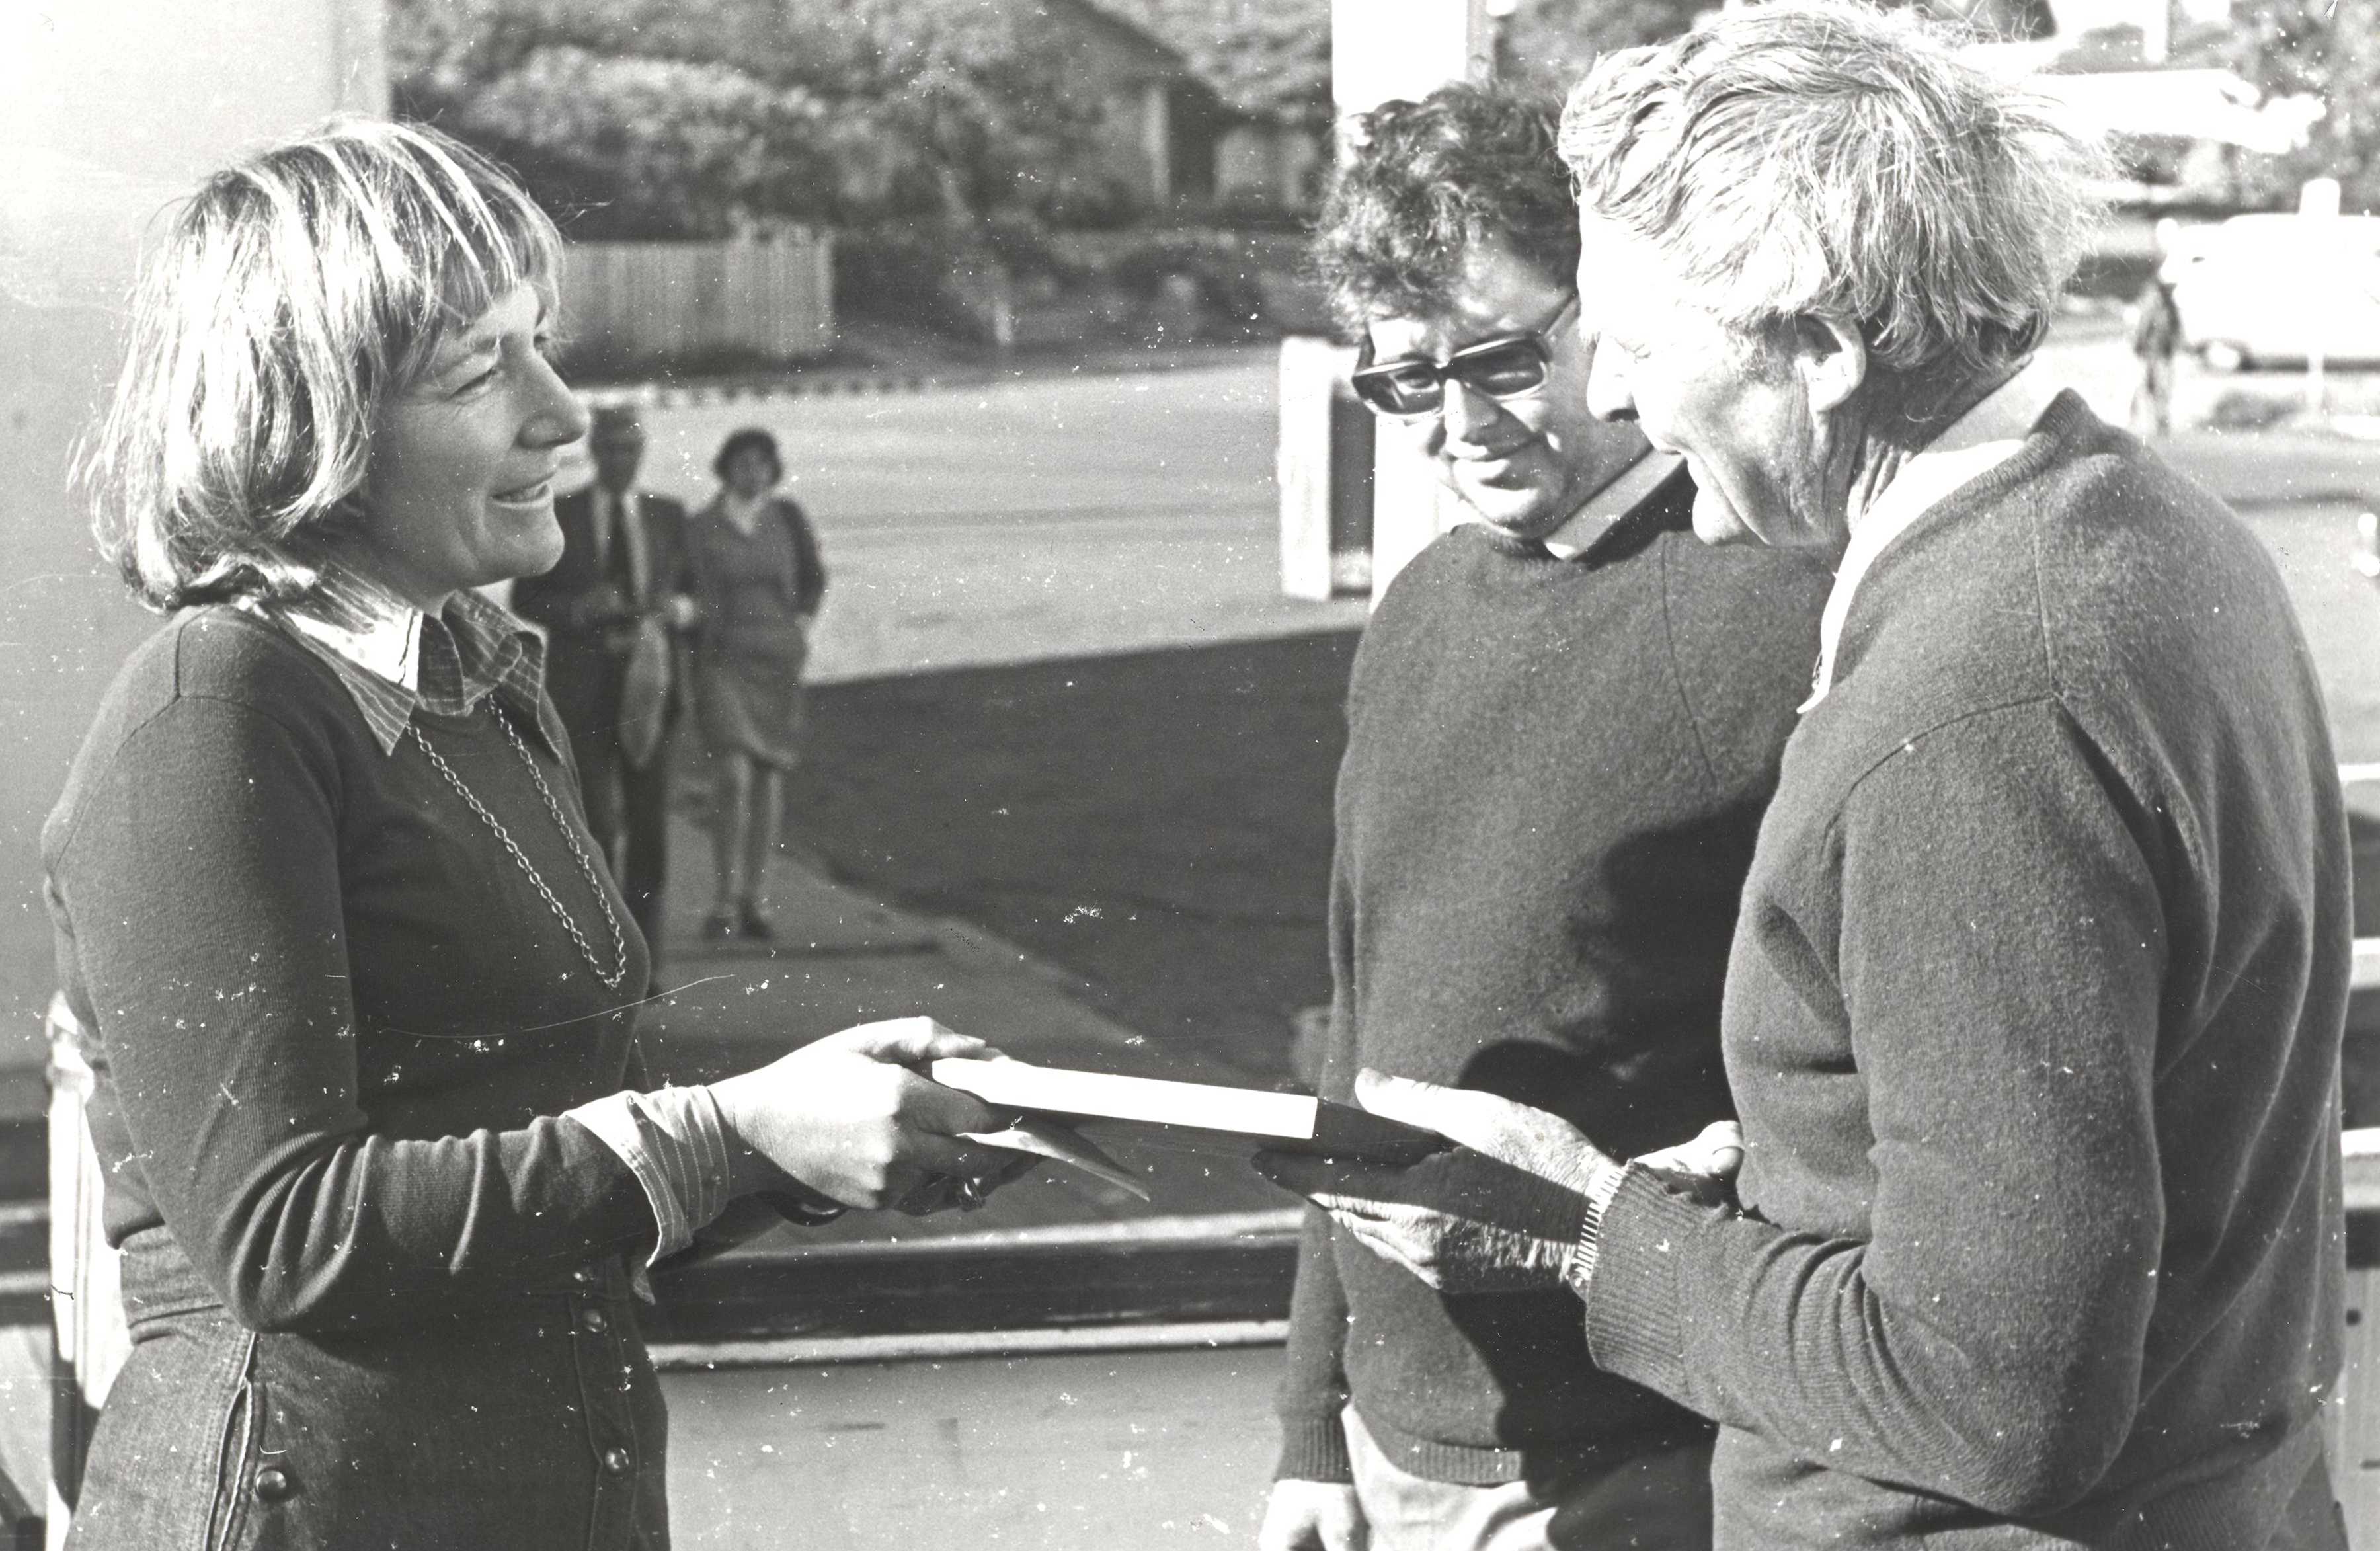 Presentation from Mrs S Pyke of the Eastern Shore branch of the Parents’ Association to Bill Roche (owner of the ‘Cartela’) in 1977, following transportation of children across the river to school while the Tasman Bridge was down, 1975–77.